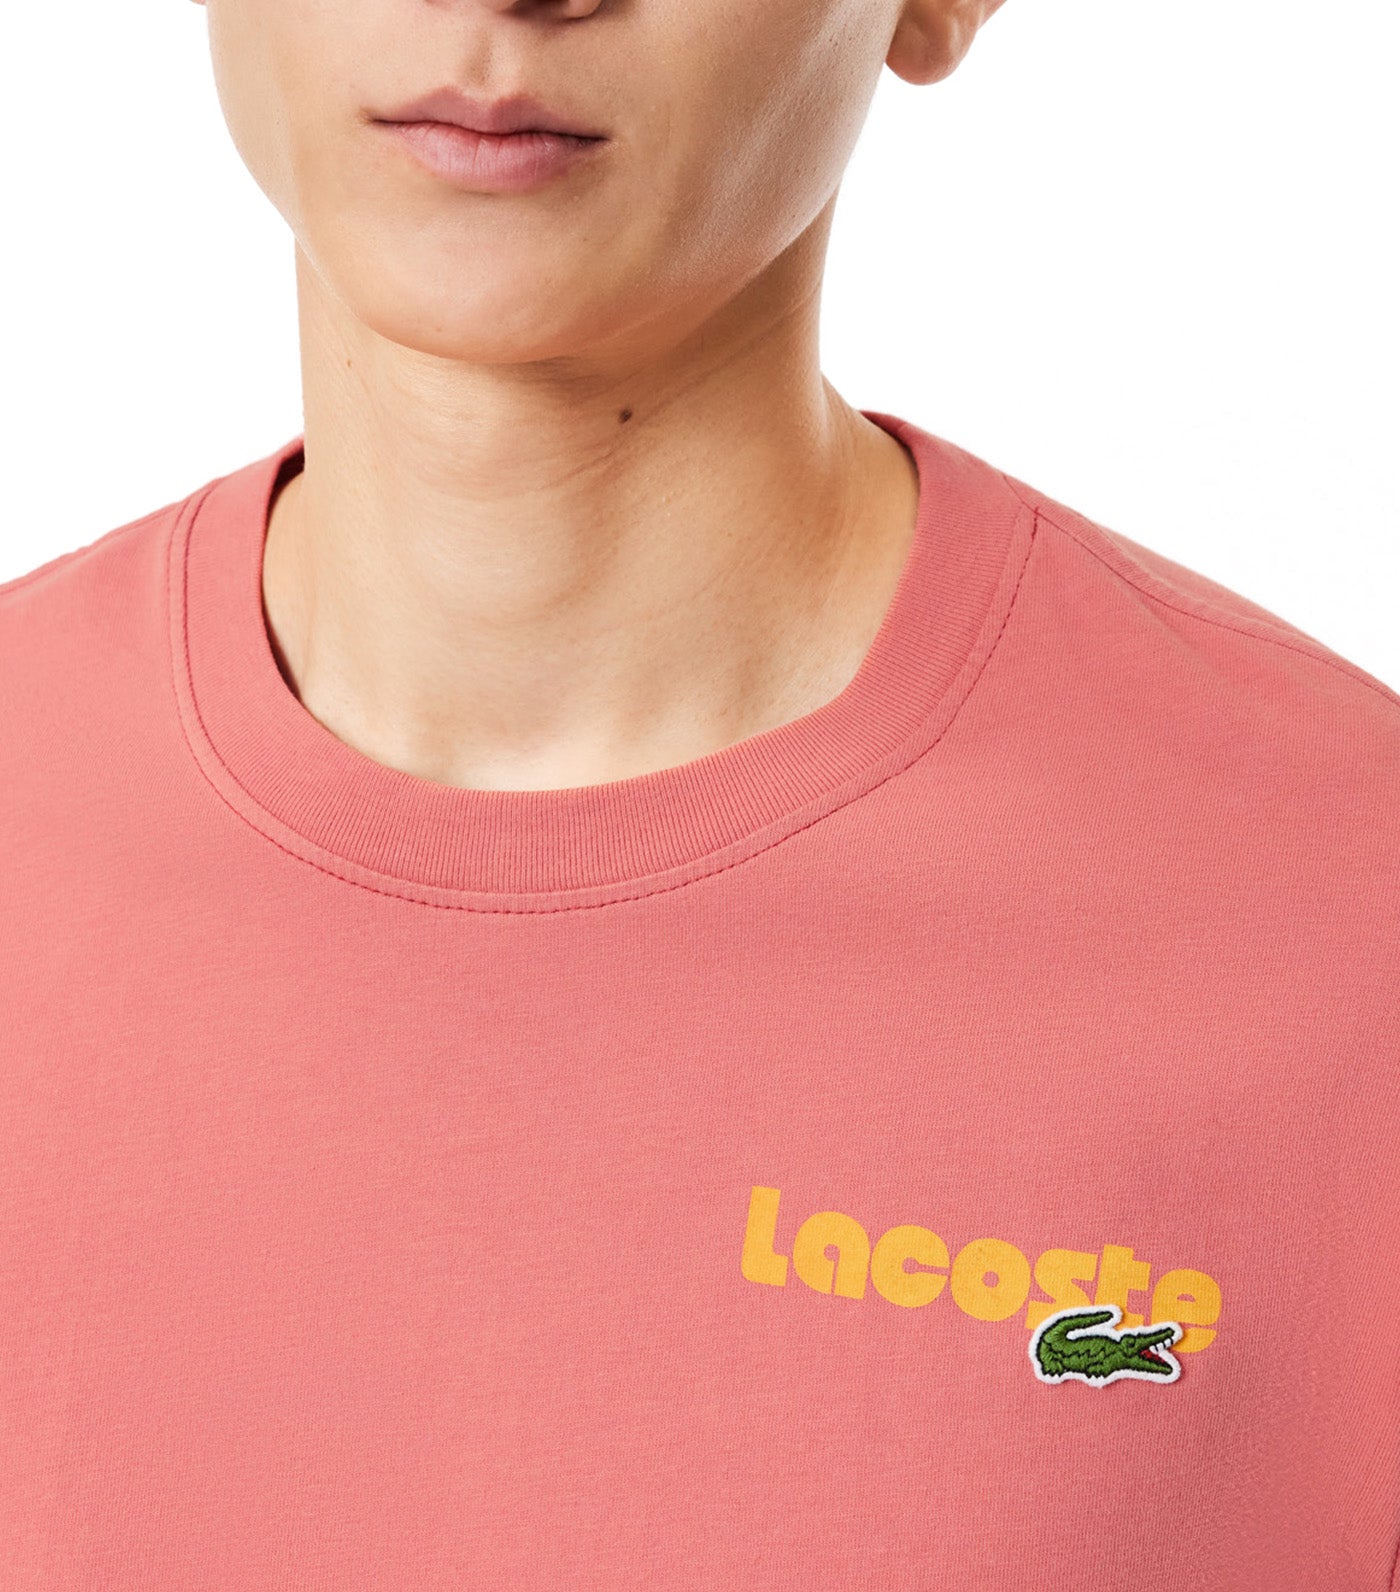 Washed Effect Ombré Lacoste Print T-Shirt Sierra Red